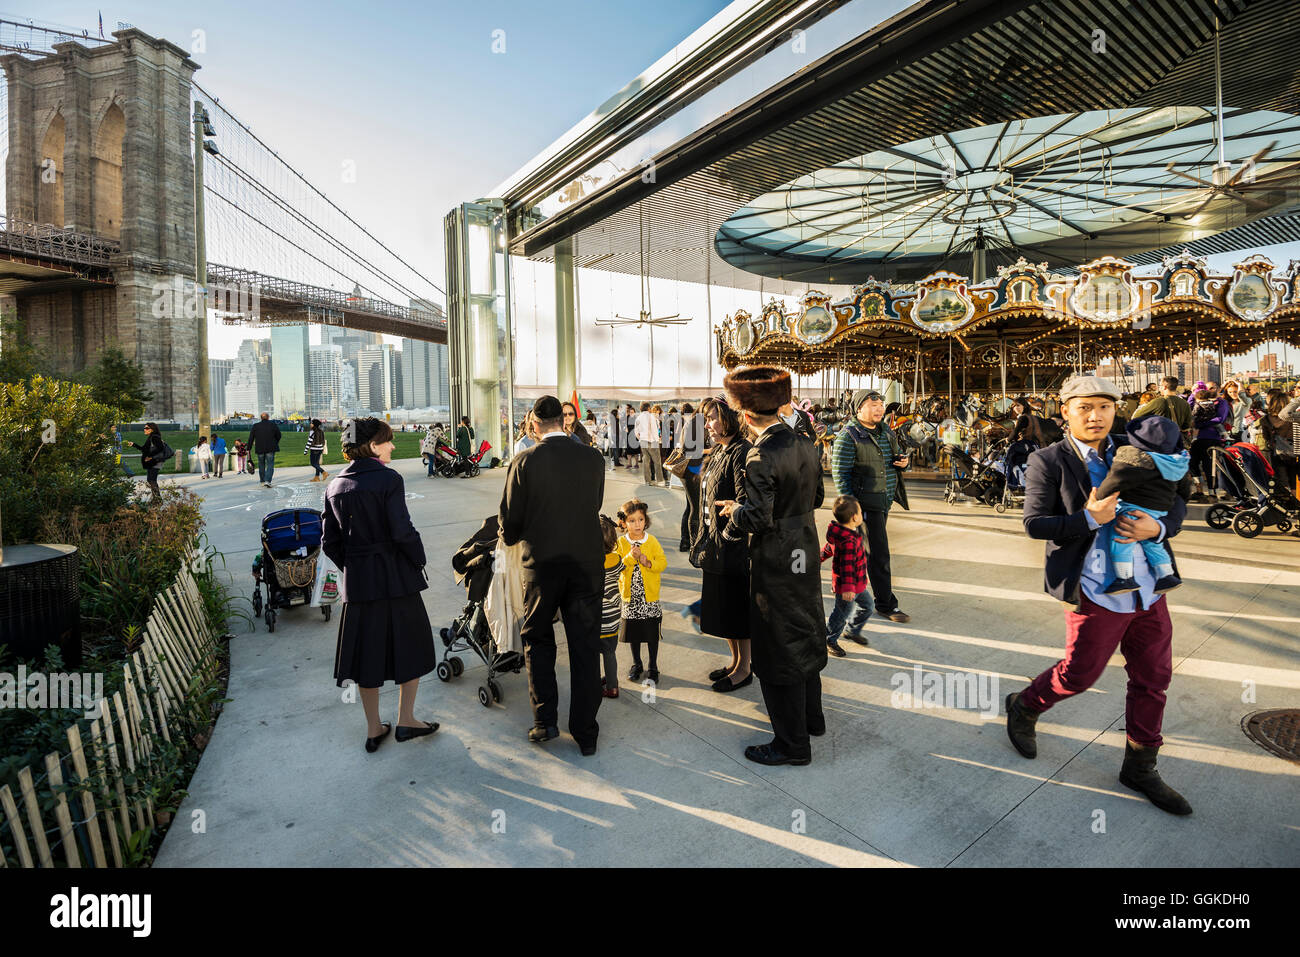 Fulton Ferry State Park, Dumbo, Brooklyn, New York, USA Banque D'Images